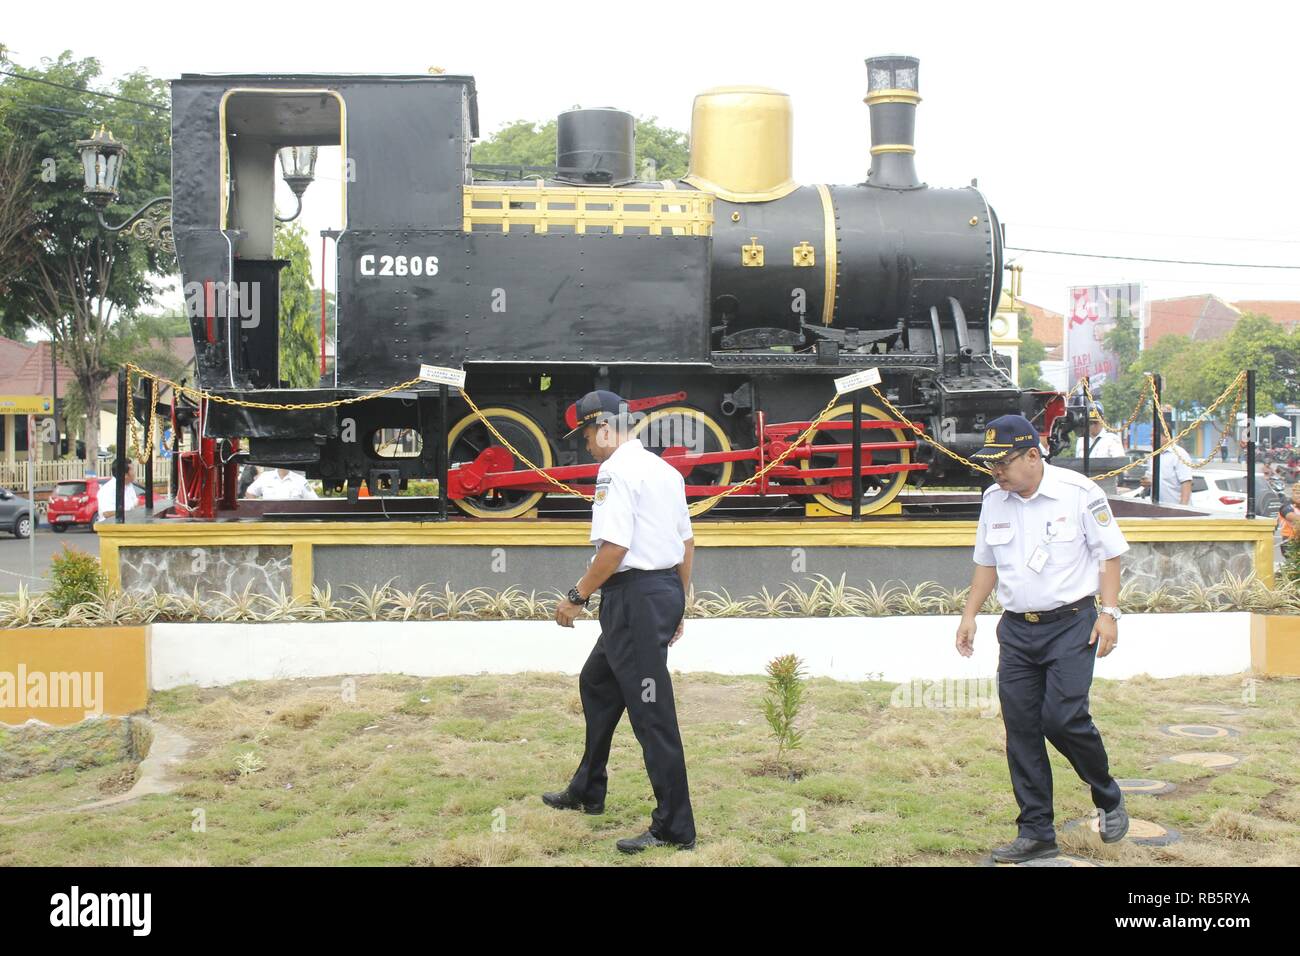 Vice President of PT. Indonesian Railroad/KAI VII Madiun Operation Area,  Heri Siswanto [left] accompanied by Deputy Vice President, Rumekso [right]  reviewed C2606 Locomotive Monument Park near the direct crossing road [JPL]  area